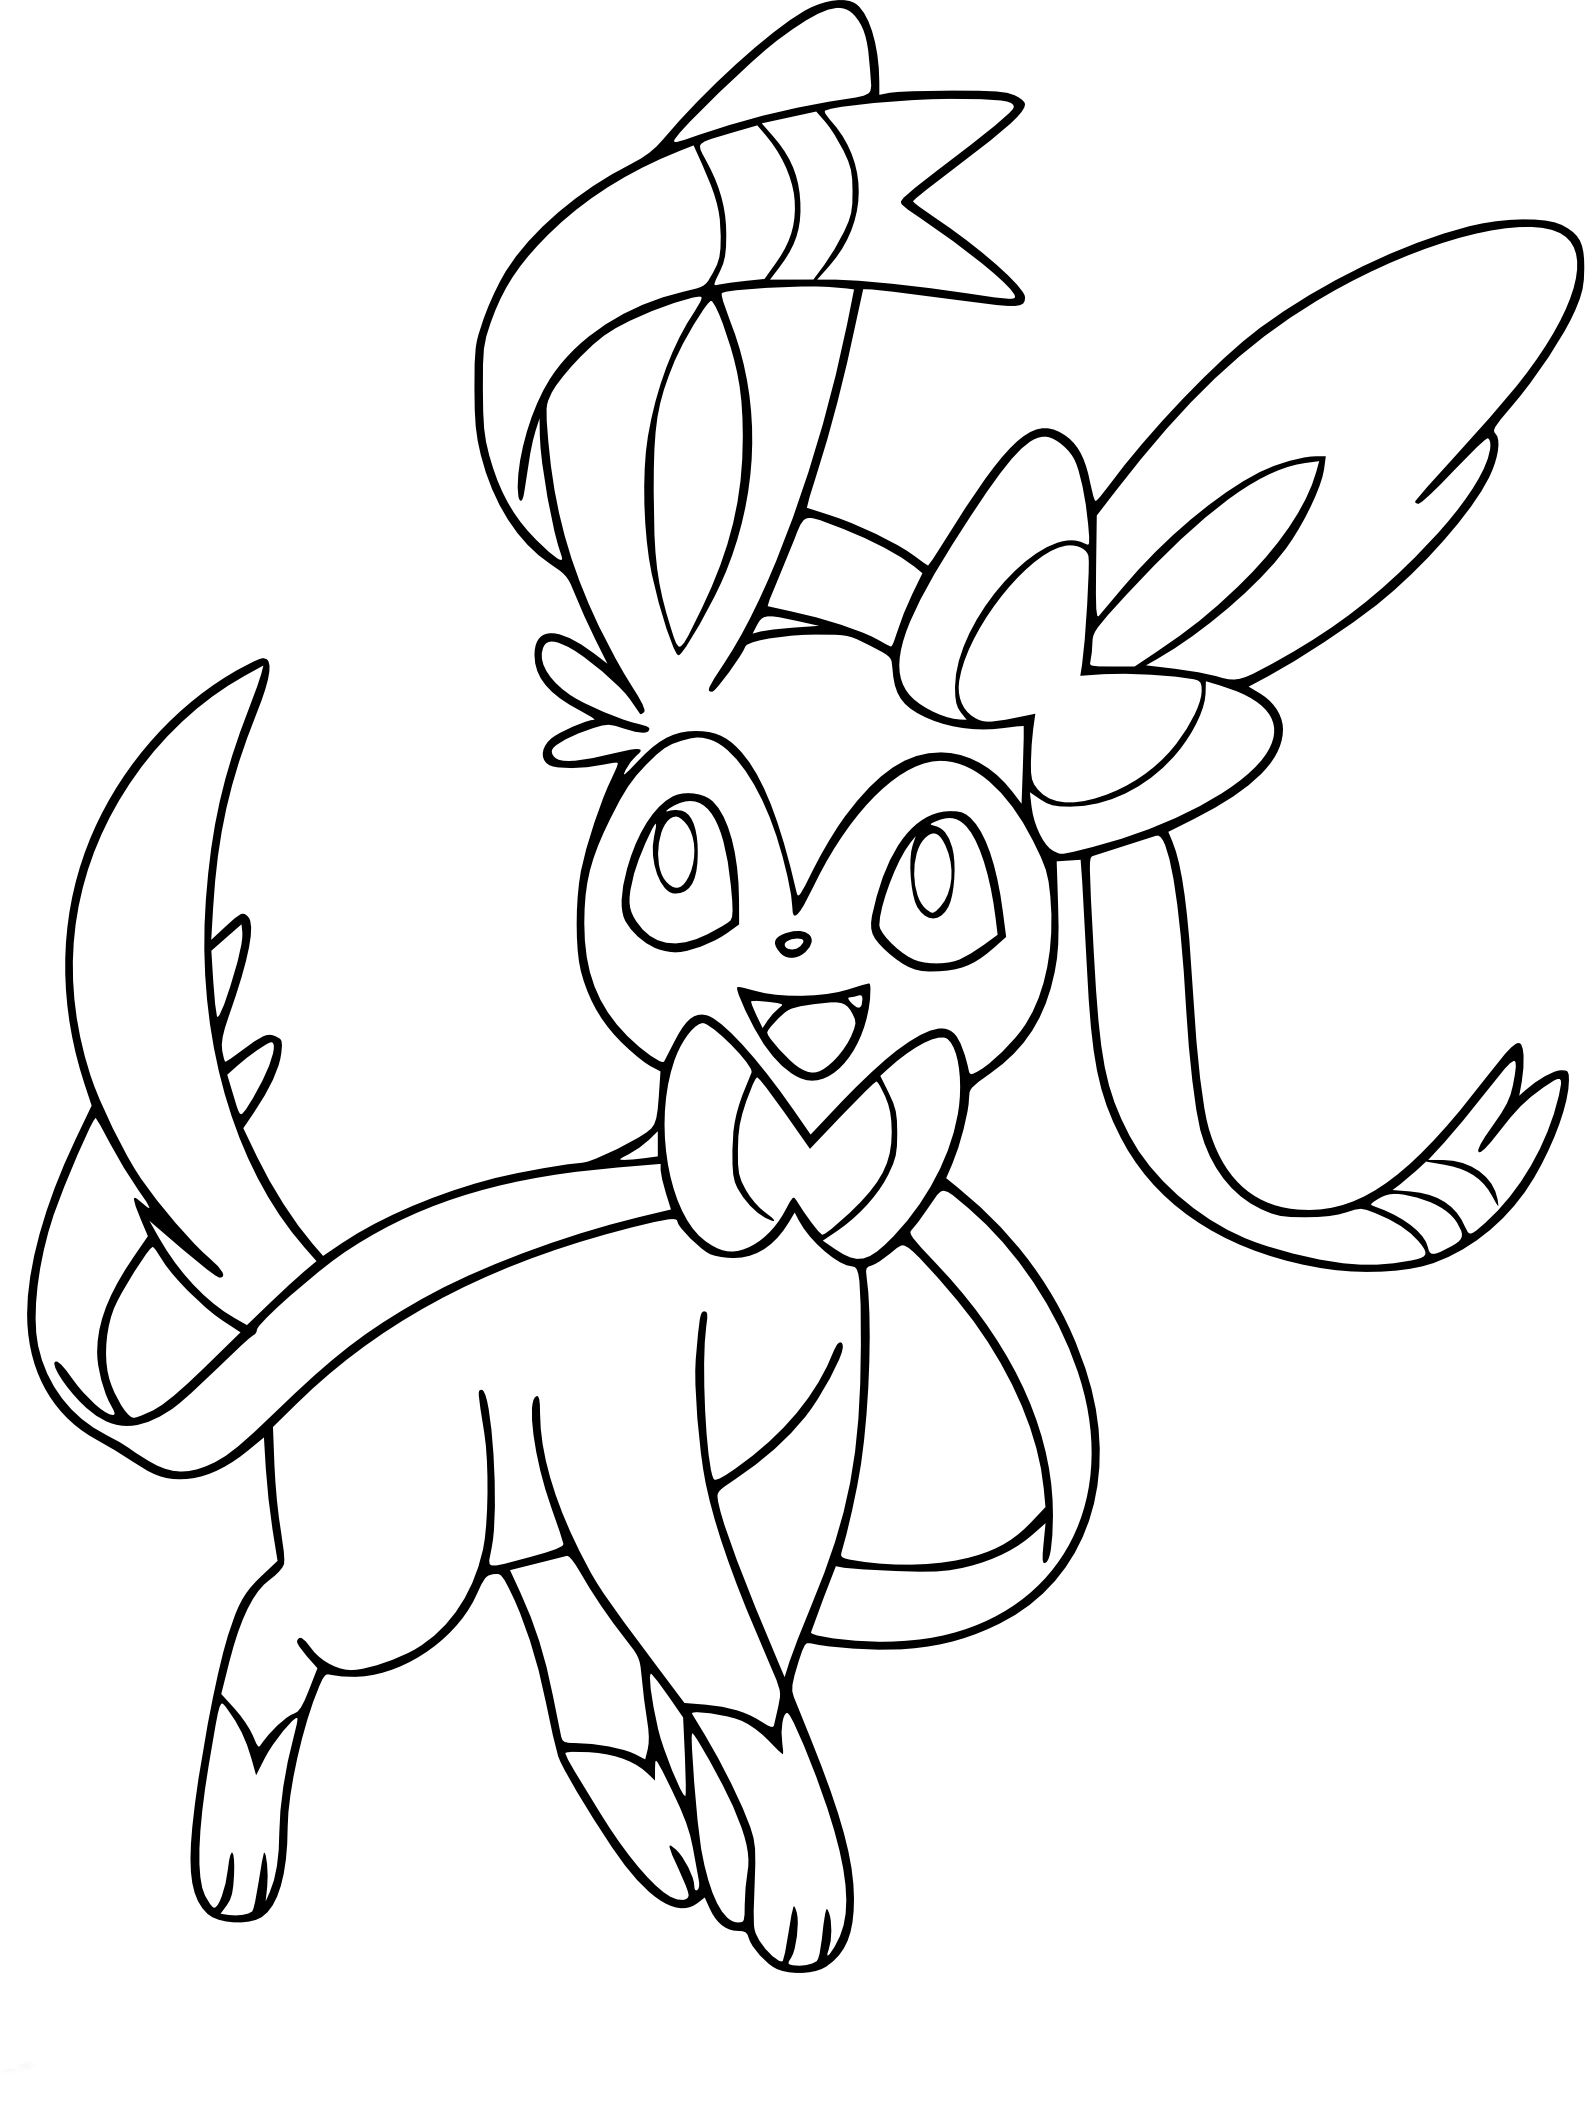 Explore the beauty of eeveelutions coloring pages